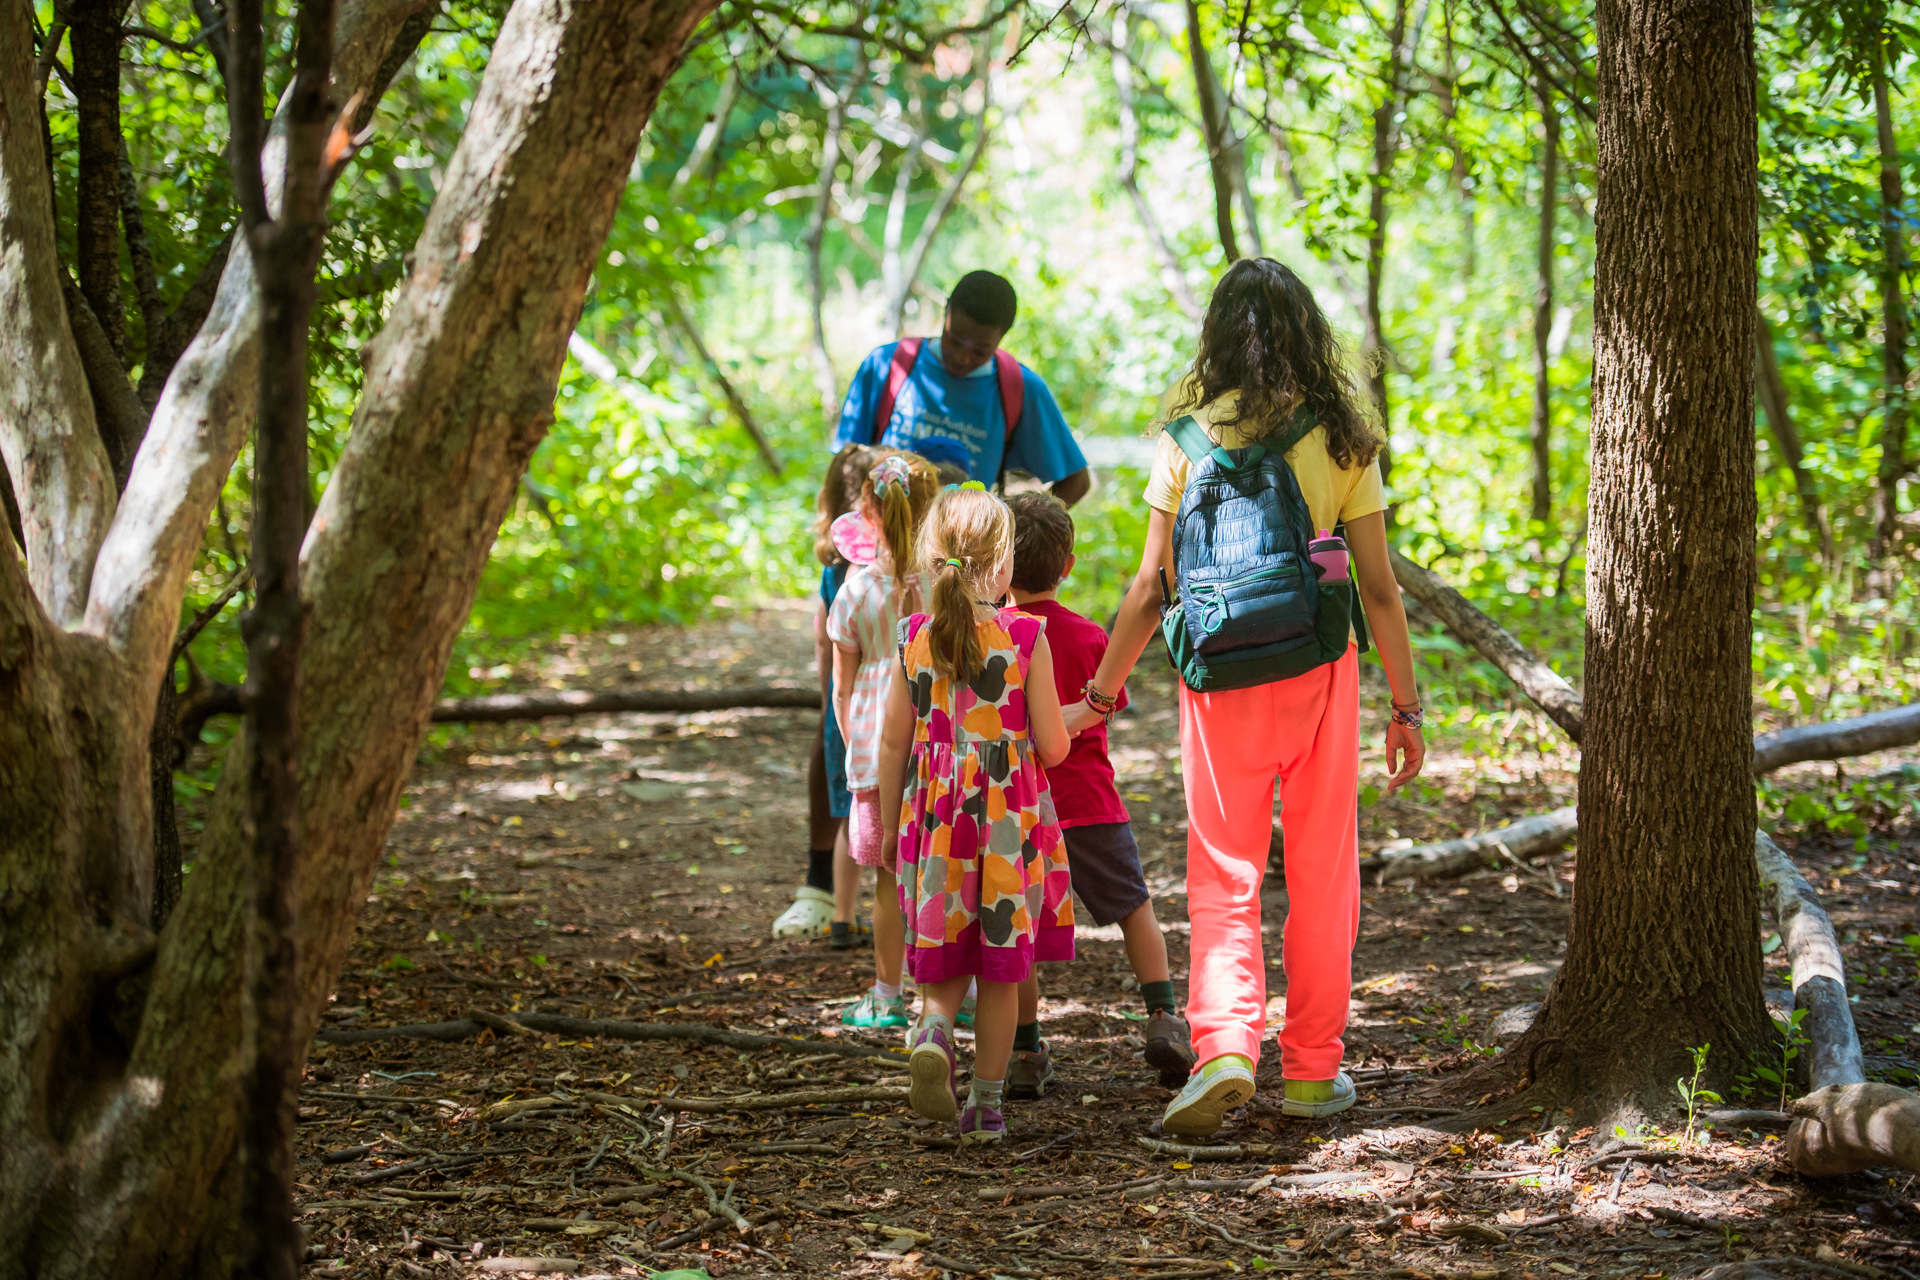 A group of campers at Boston Nature Center Camp and their counselors walk along a shady trail on a hike